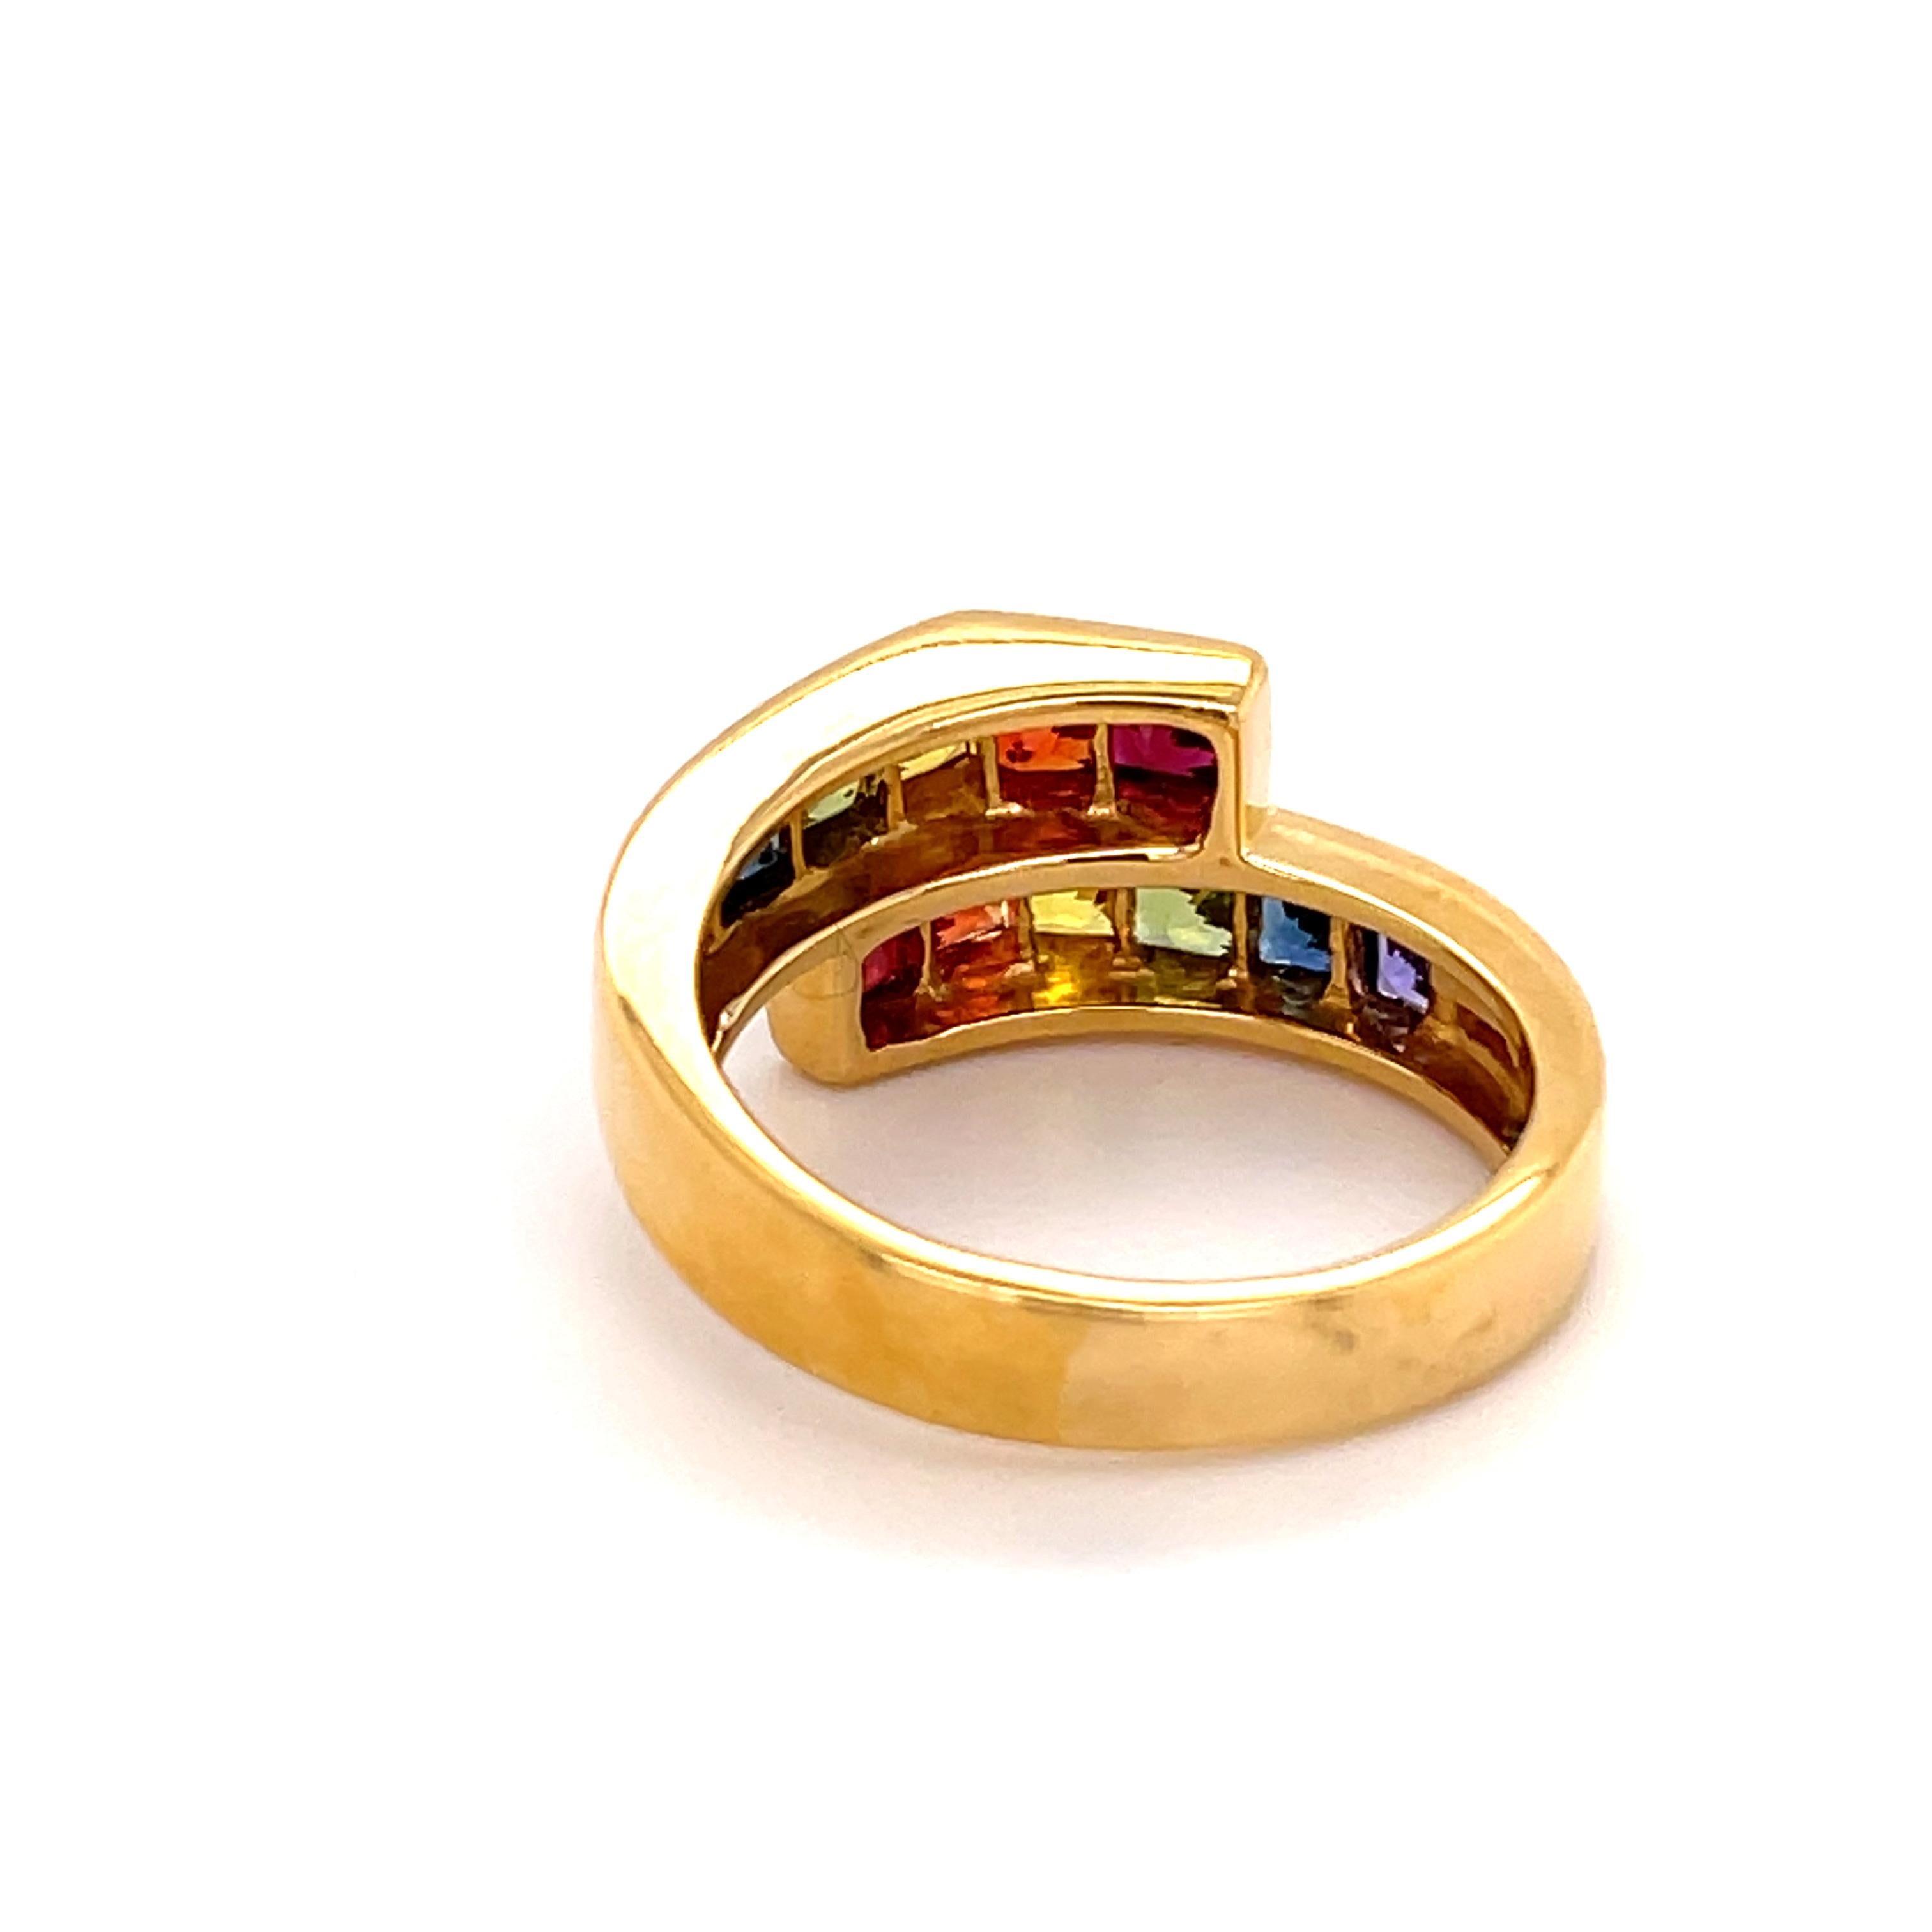 2.02 Carats Multi-Color Sapphire Ring in 18 Karat Gold In New Condition For Sale In Tucson, AZ